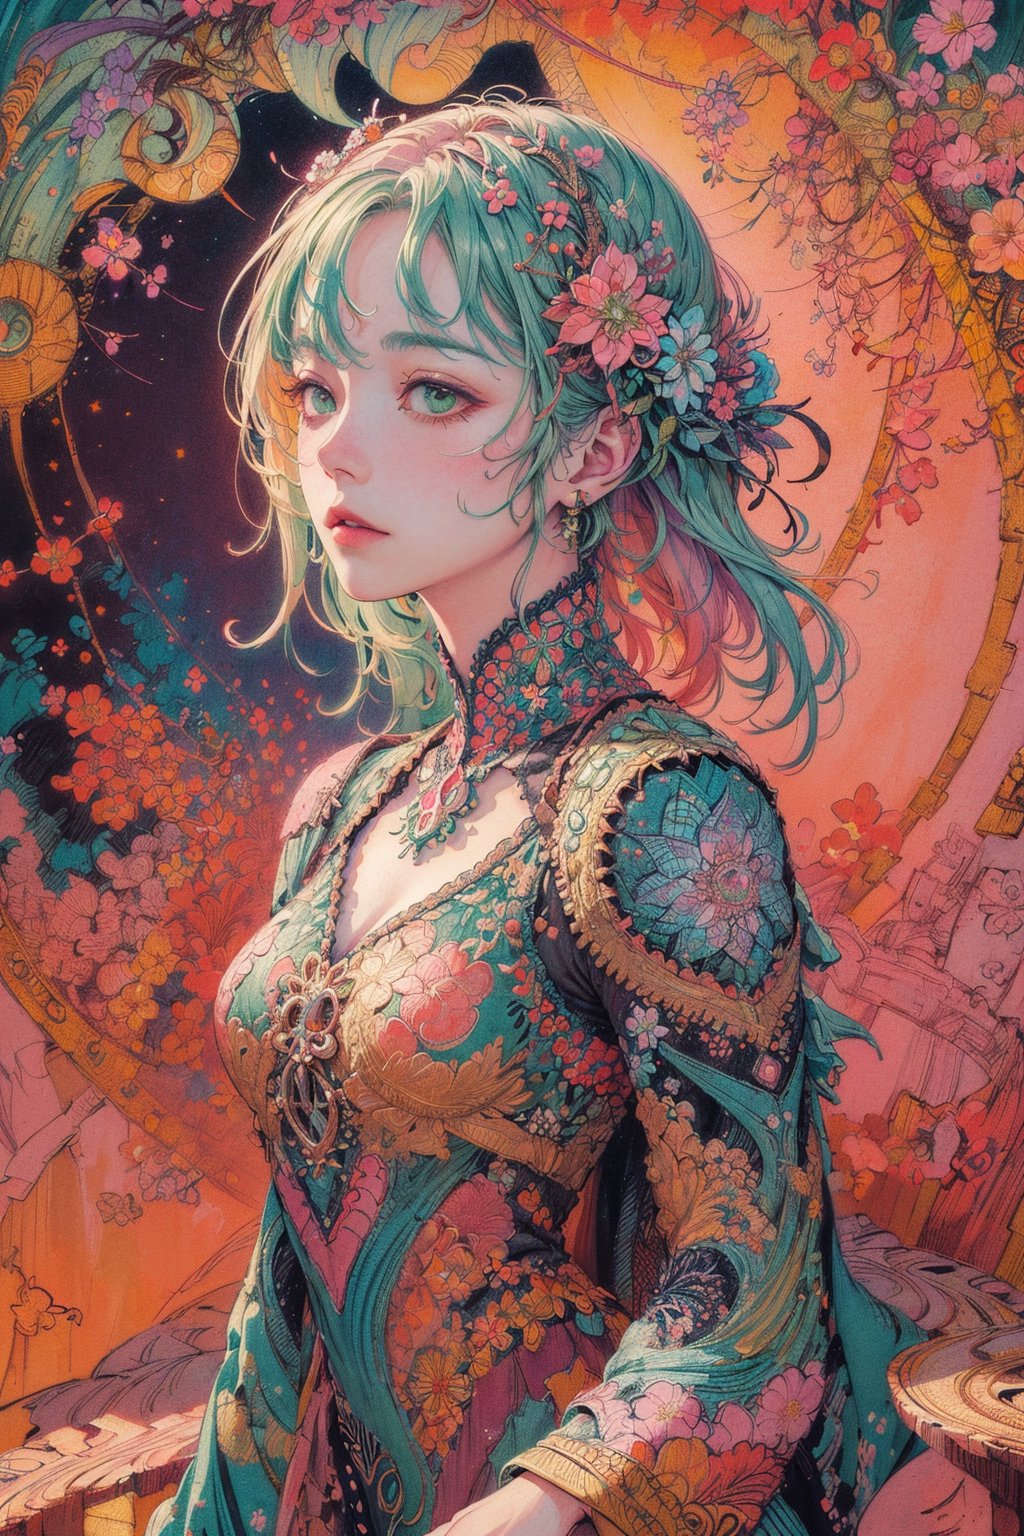 high resolution,  ultra detailed,  (masterpiece:1.4), taeri,  super photo realistic illustration, highres, ultla detailed, absurdres,  best quality, woman,  flower dress,  colorful,  darl background, flower armor, green theme, exposure blend,  medium shot,  bokeh,  (hdr:1.4),  high contrast,  (cinematic,  teal and orange:0.85),  (muted colors,  dim colors,  soothing tones:1.3),  

(colorful:1.5), glowing lights, pillar of lights, blooming light effect,
papier colle, paper collage, layered compositions, varied textures, abstract designs, artistic juxtapositions, mixed-media approach,
(Zentangle:1.5), structured patterns, meditative drawing, intricate designs, focus and relaxation, creative doodling, artistic expression,